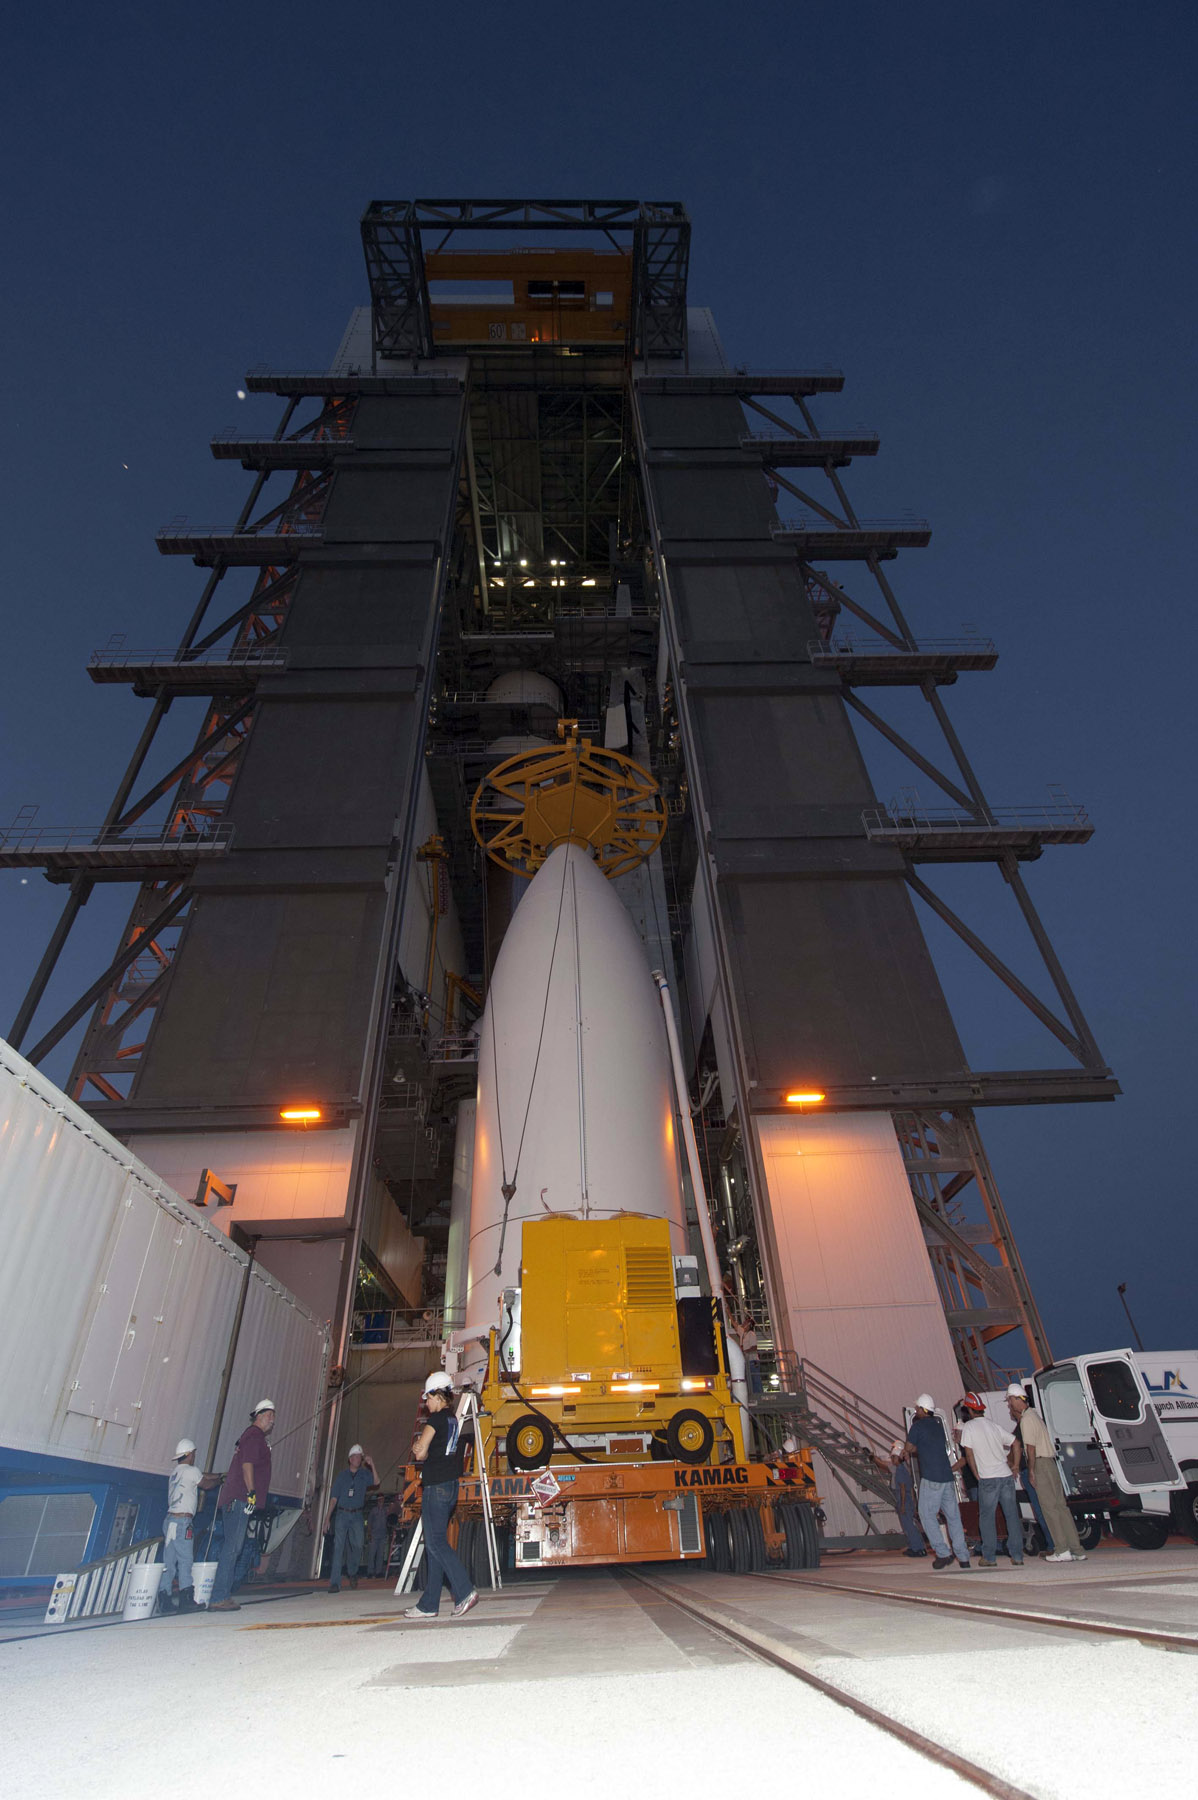 The U.S. Navy’s Mobile User Objective System (MUOS)-2 satellite, encapsulated with its payload fairing, is transferred from the Vertical Integration Facility to SLC-41 and is awaiting Atlas V 551 launch vehicle on 8 July 2013. Photo Credit: United Launch Alliance